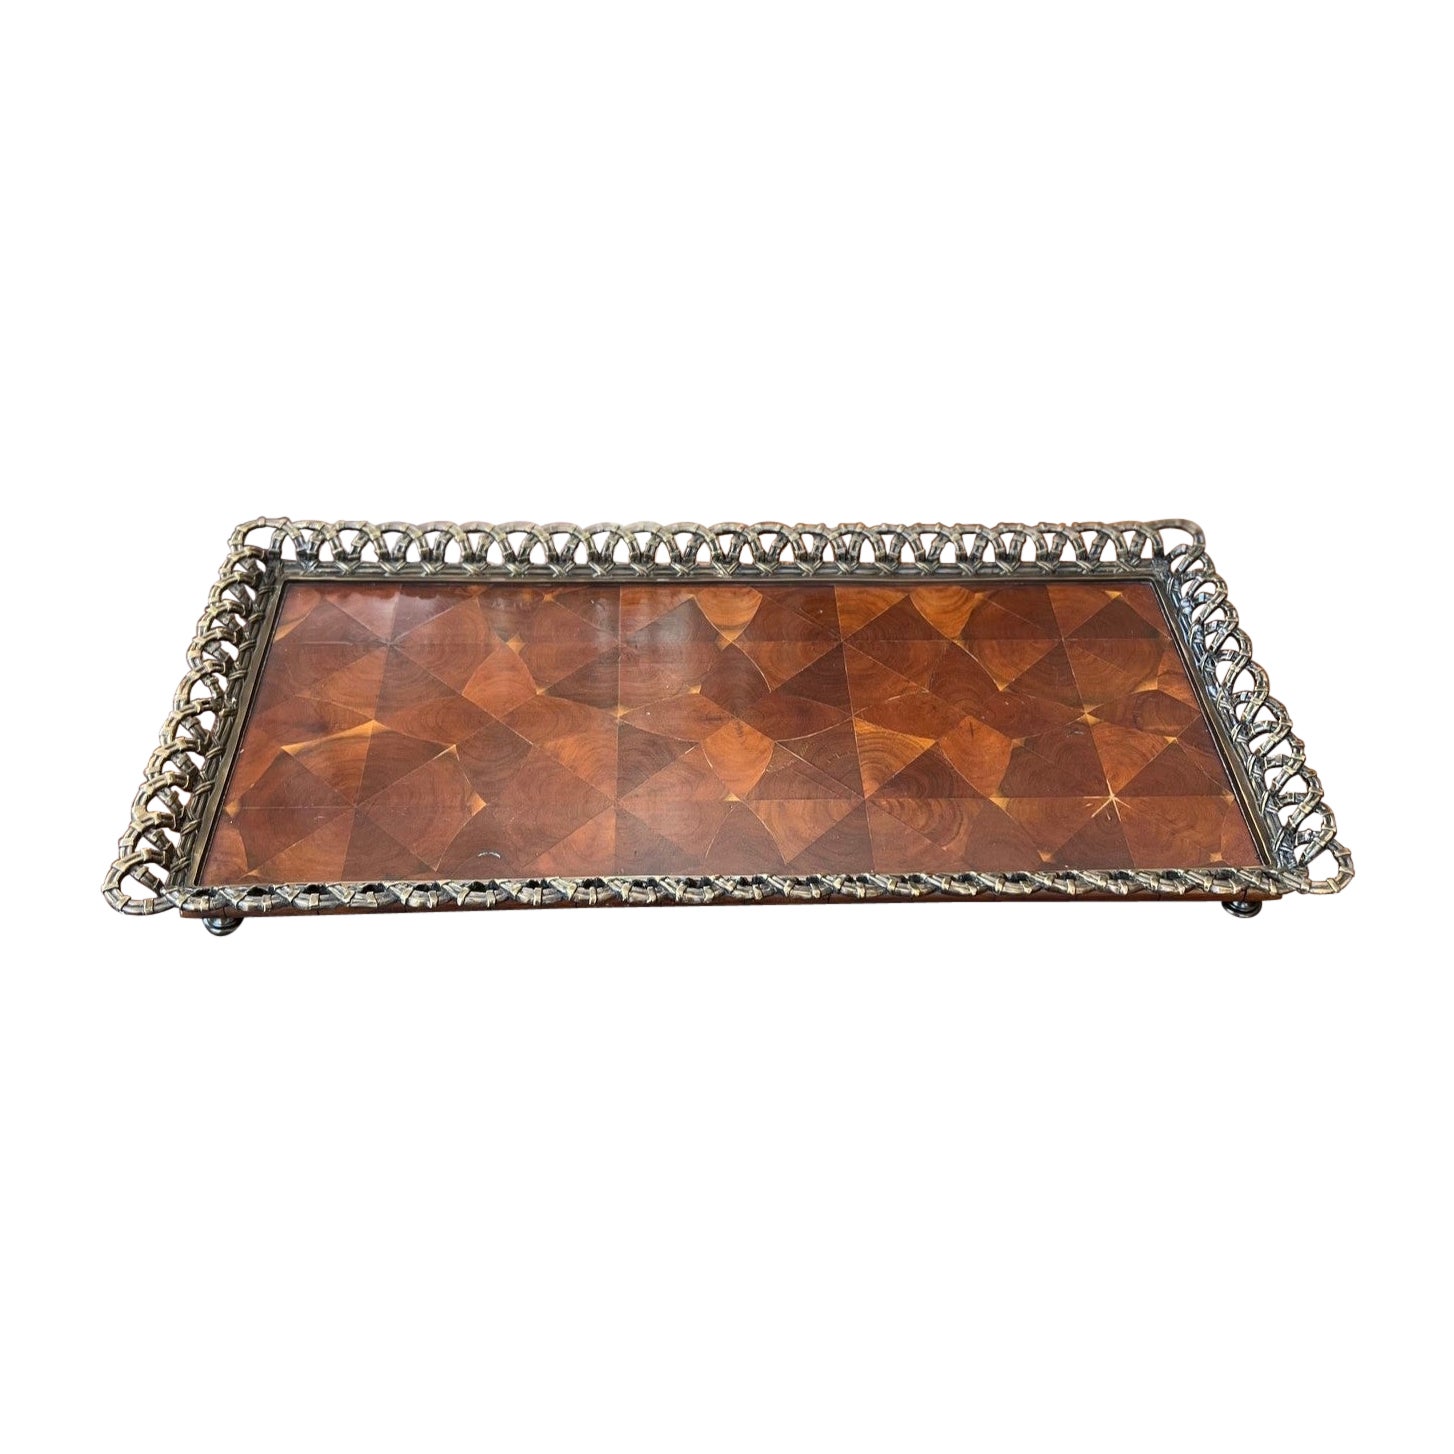 Theodore Alexander Oyster Veneer Tray With Antiqued Brass Gallery and Bun Feet